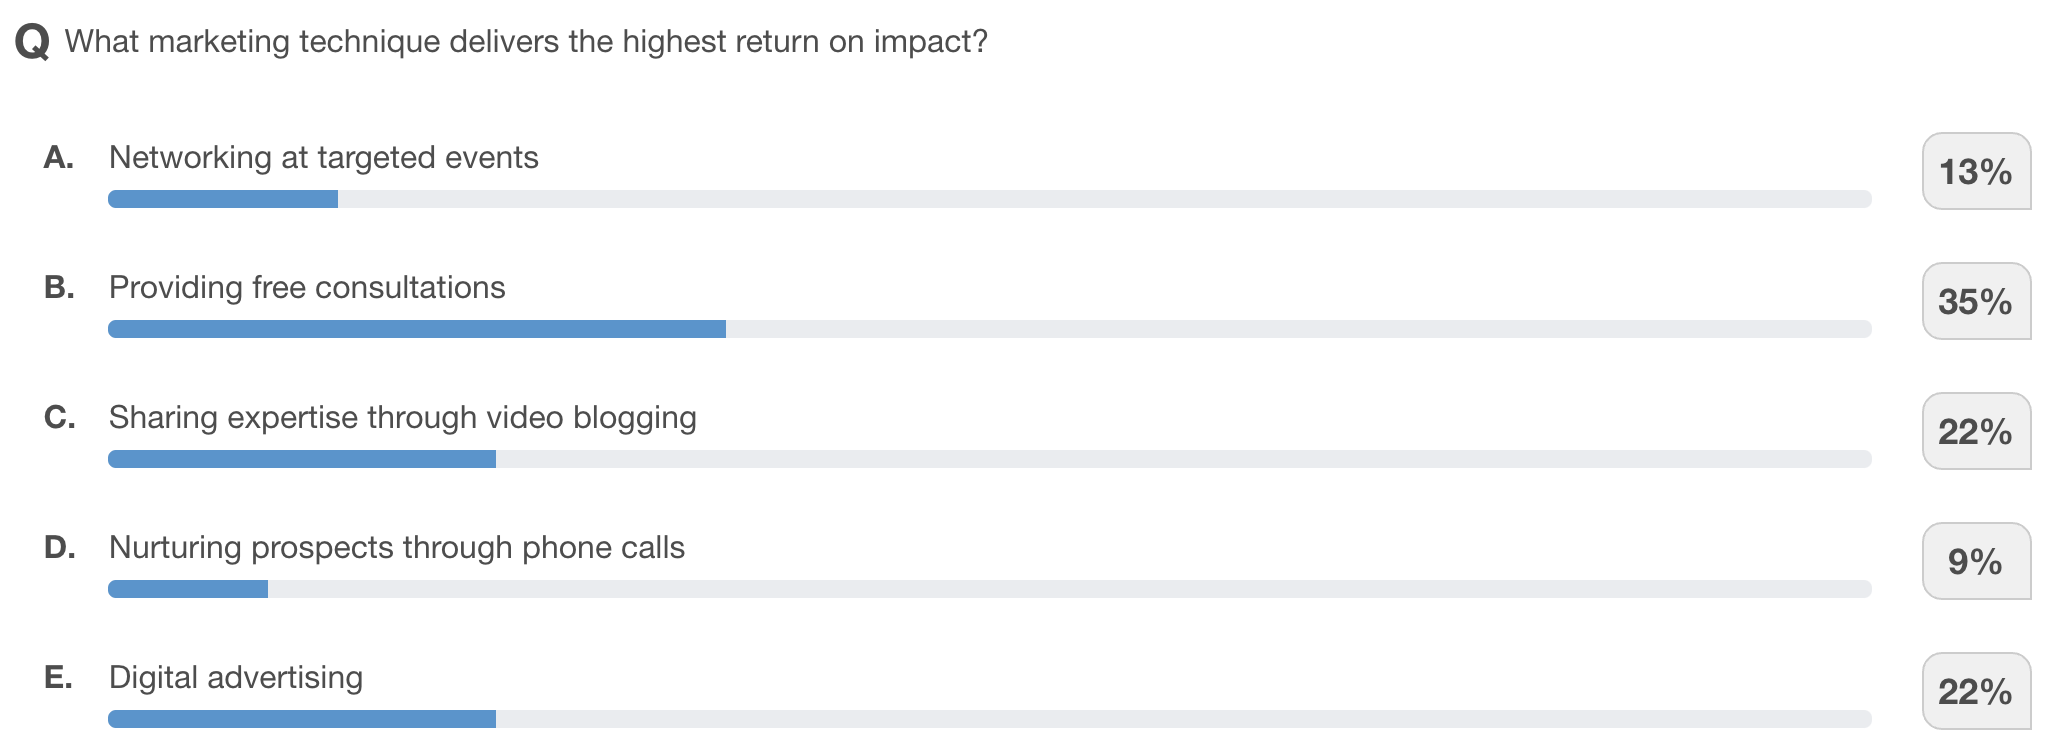 What marketing technique delivers the highest return on impact